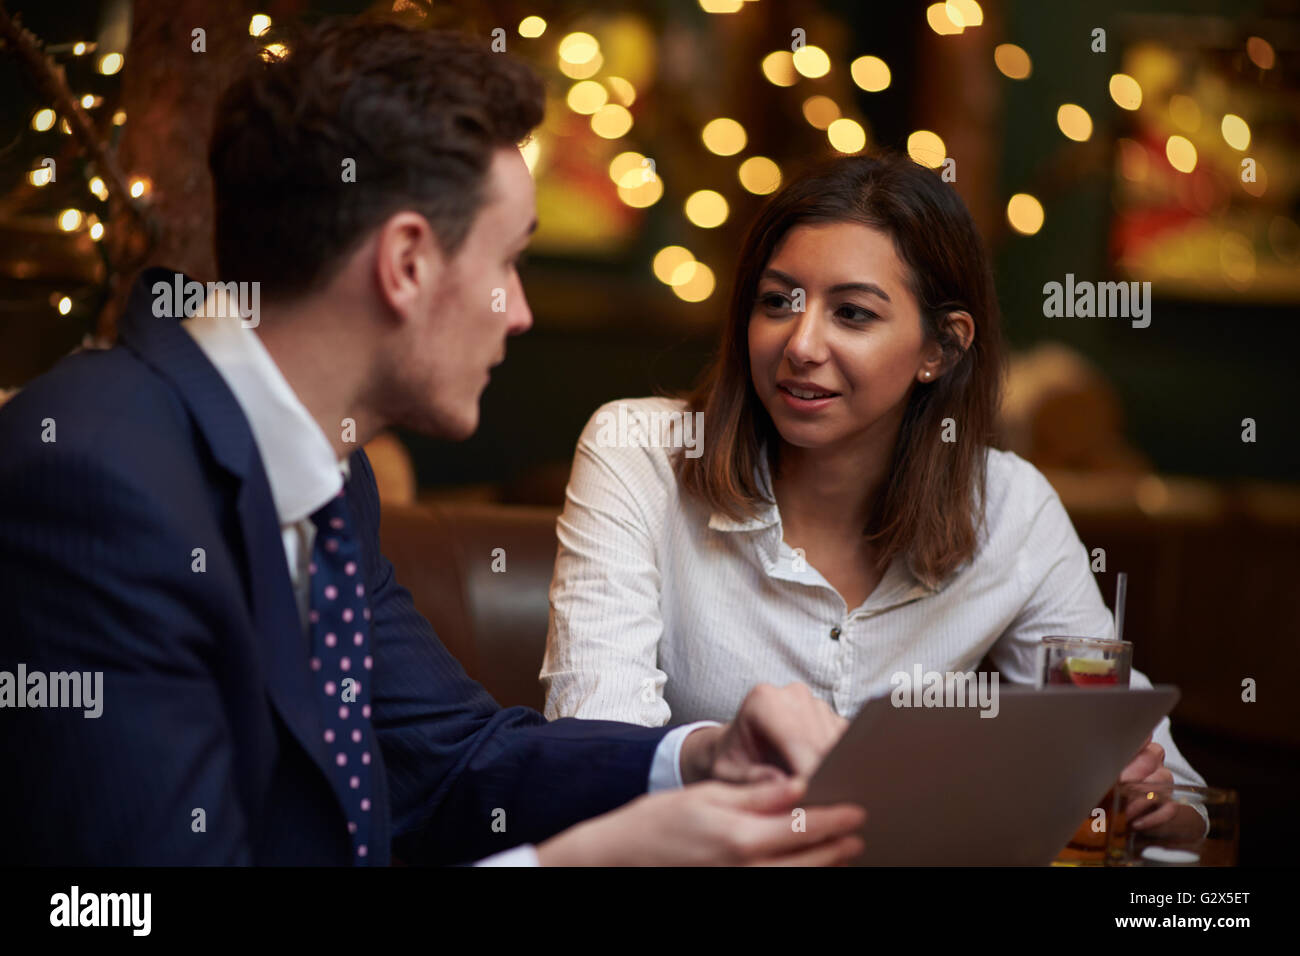 Business Colleagues Meeting In Bar After Work Stock Photo